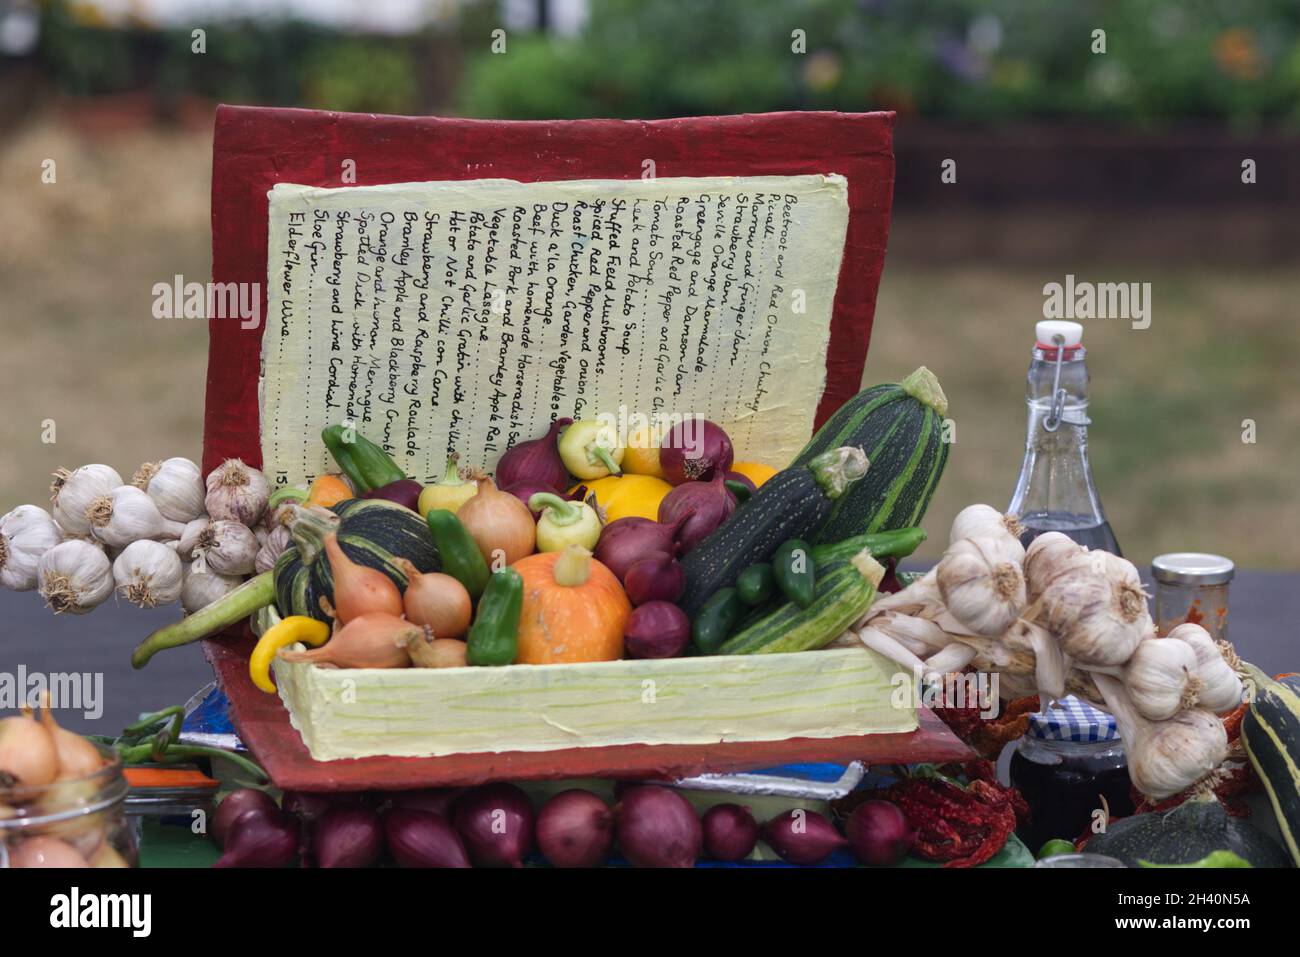 menu book and vegetables Stock Photo